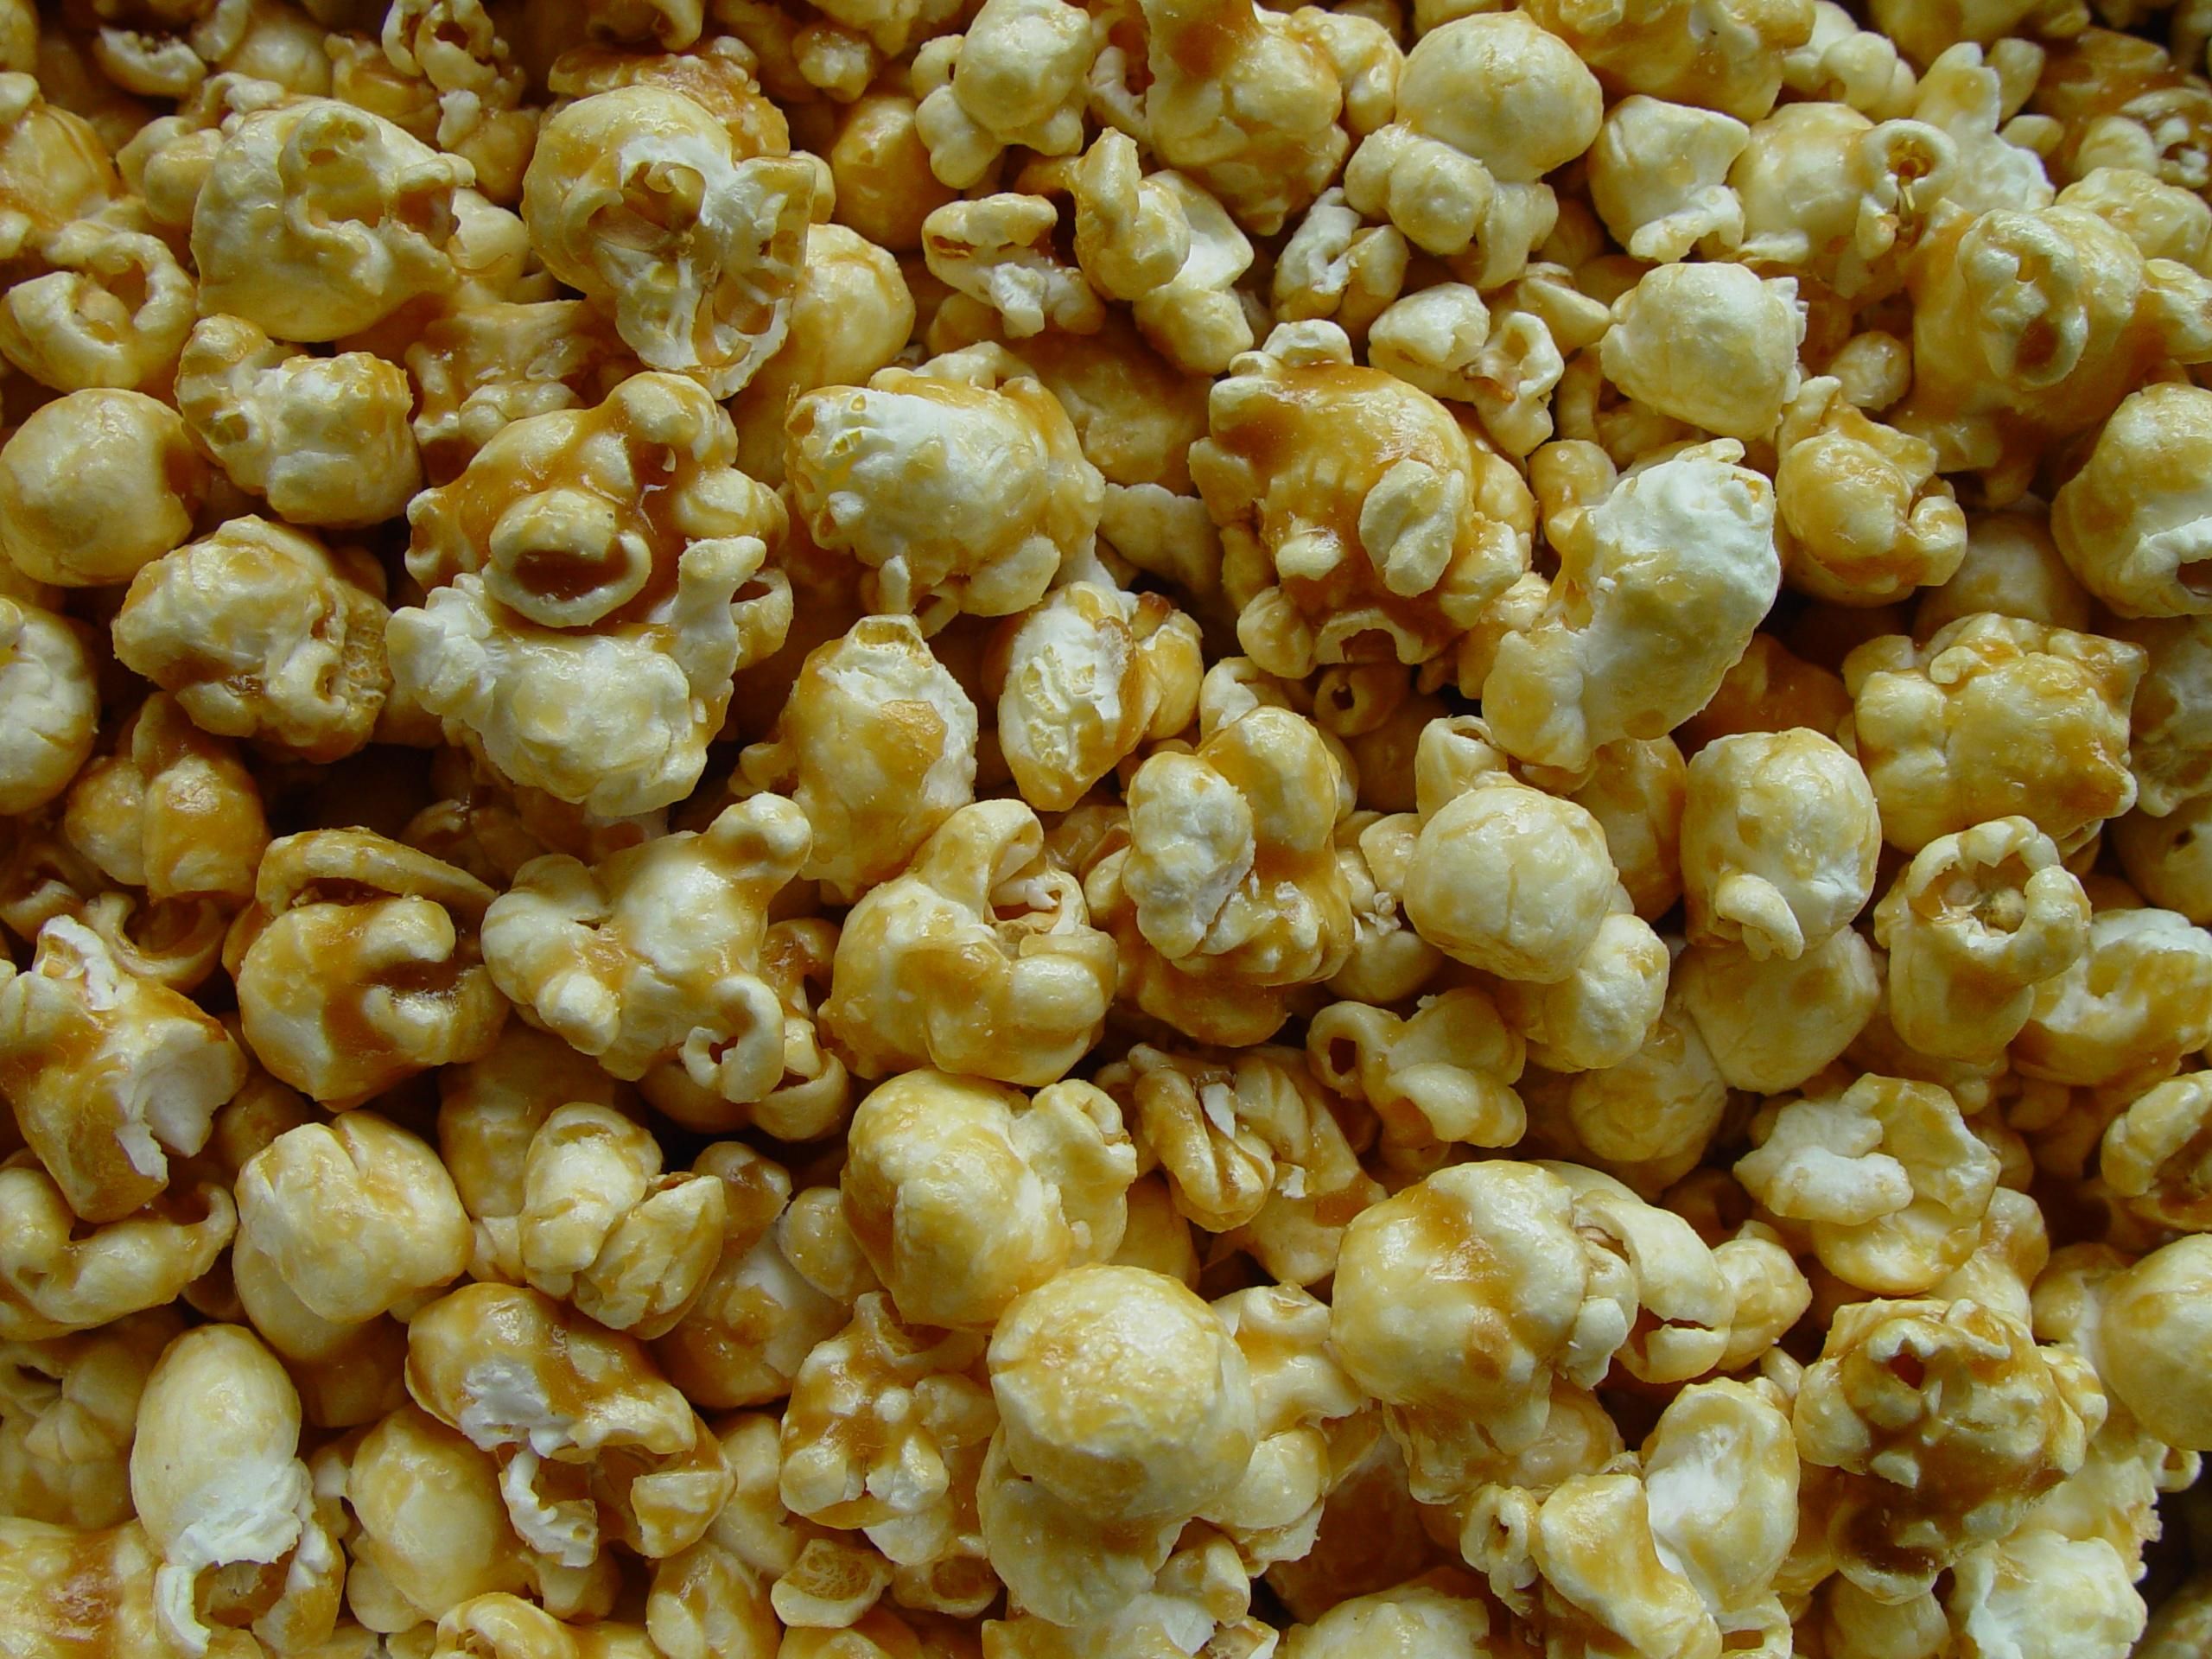 File:Candied popcorn bliss bombs.jpg - Wikimedia Commons